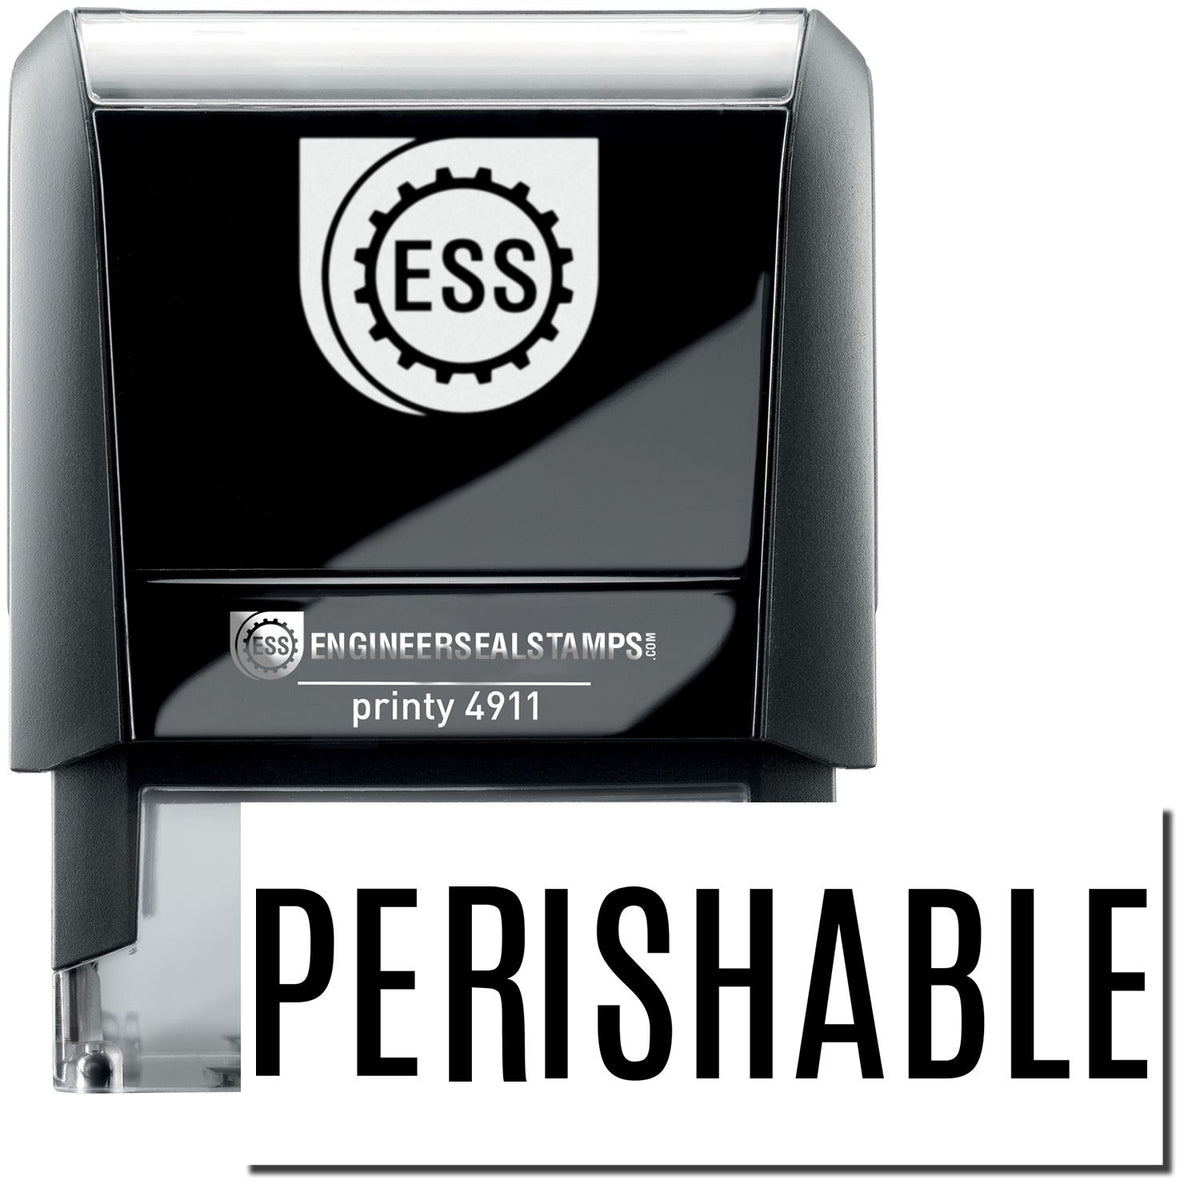 A self-inking stamp with a stamped image showing how the text &quot;PERISHABLE&quot; is displayed after stamping.